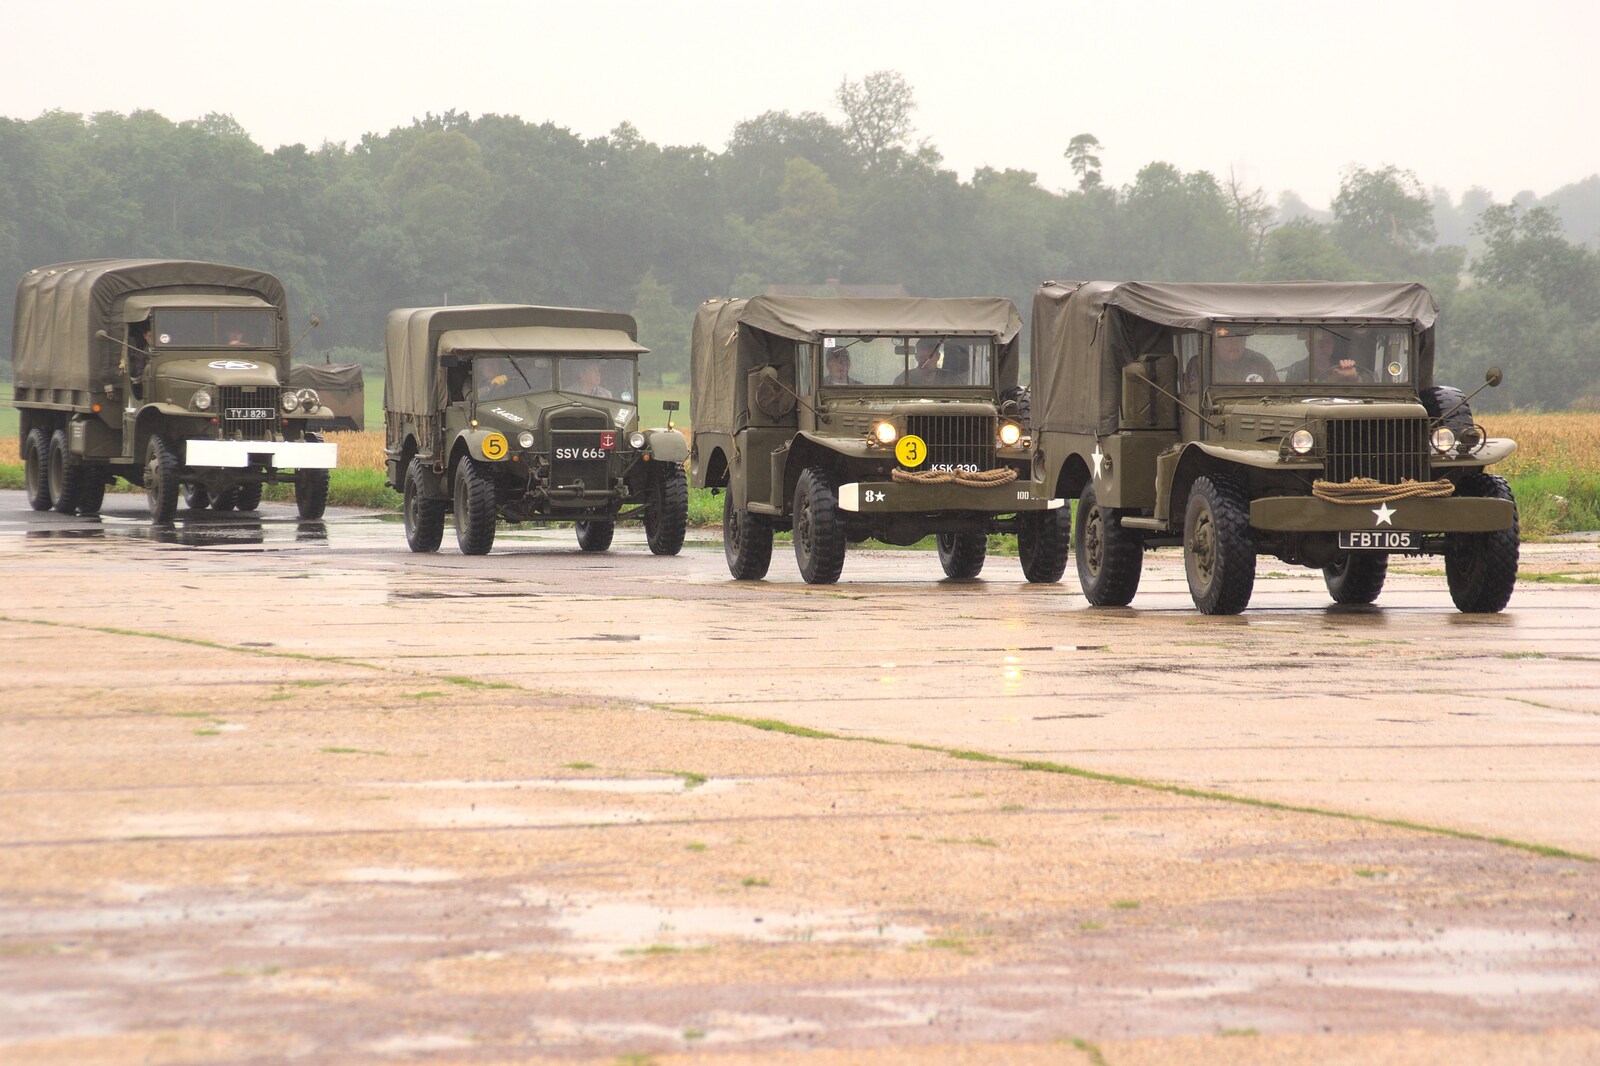 Trucks and Jeeps trundle on to the airfield from Clive's Military Vehicle Convoy, Brome Aerodrome, Suffolk - 16th July 2011